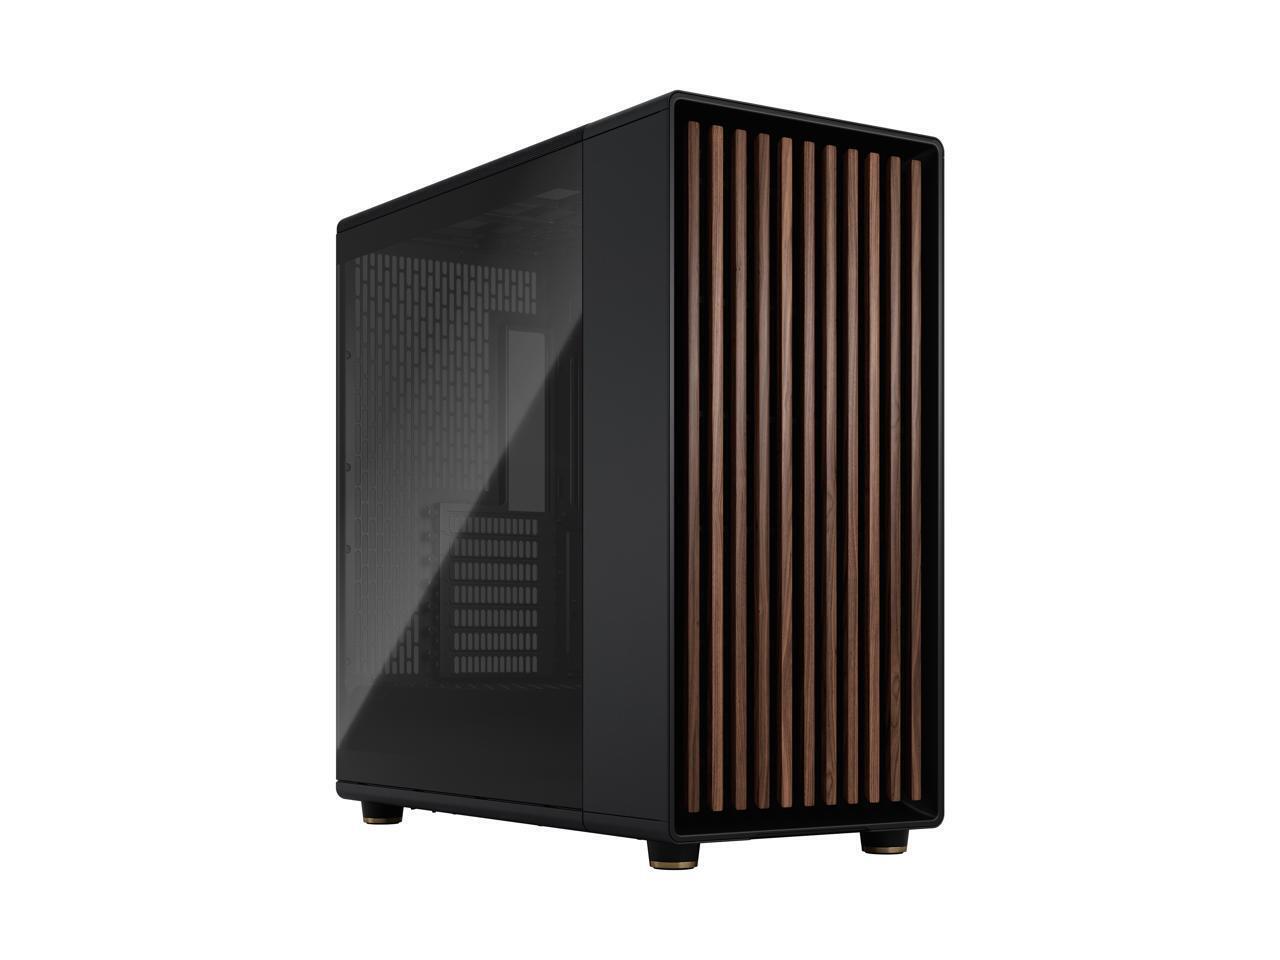 Fractal Design North XL ATX mATX Mid Tower PC Case - Charcoal Black Chassis with